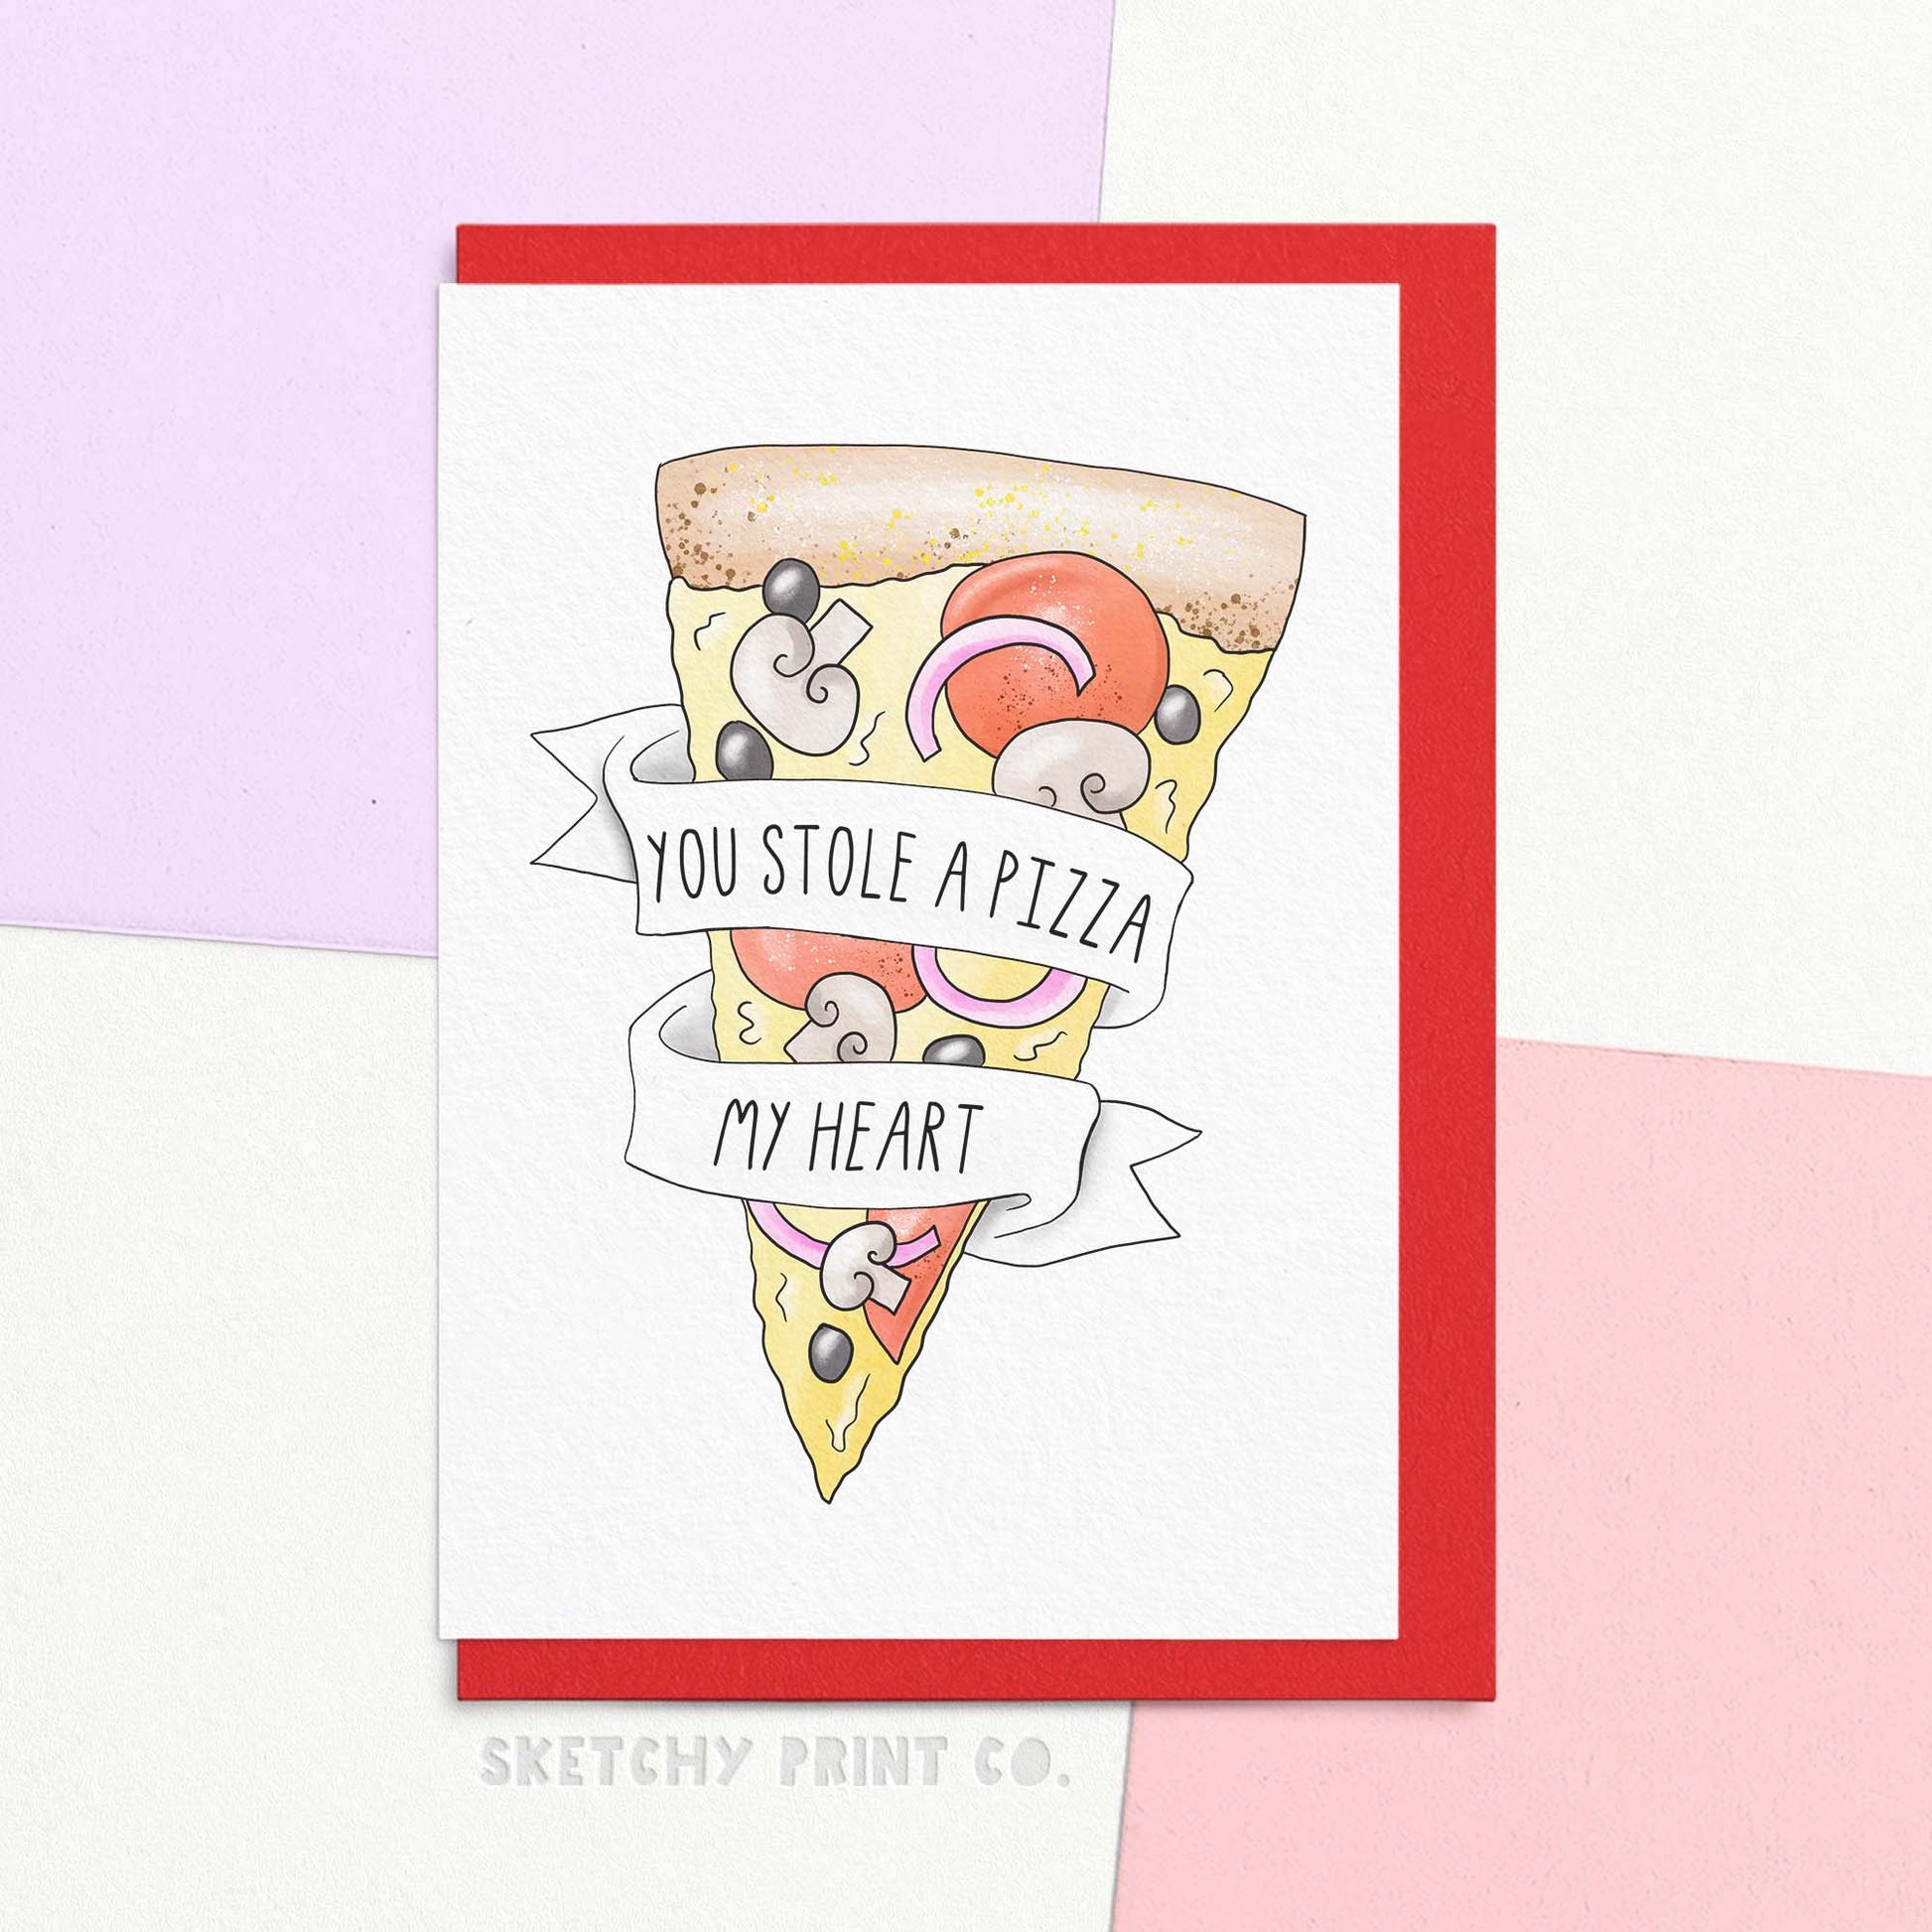 Funny Valentine's Day card reading You stole a pizza my heart. Declare your love with this funny Valentine's Day card, made for the pizza lover in your life. Whether you prefer deep pan or thin crust, this card is the perfect combination of cheesy and romantic (literally). Share a slice of your heart with this cute card!